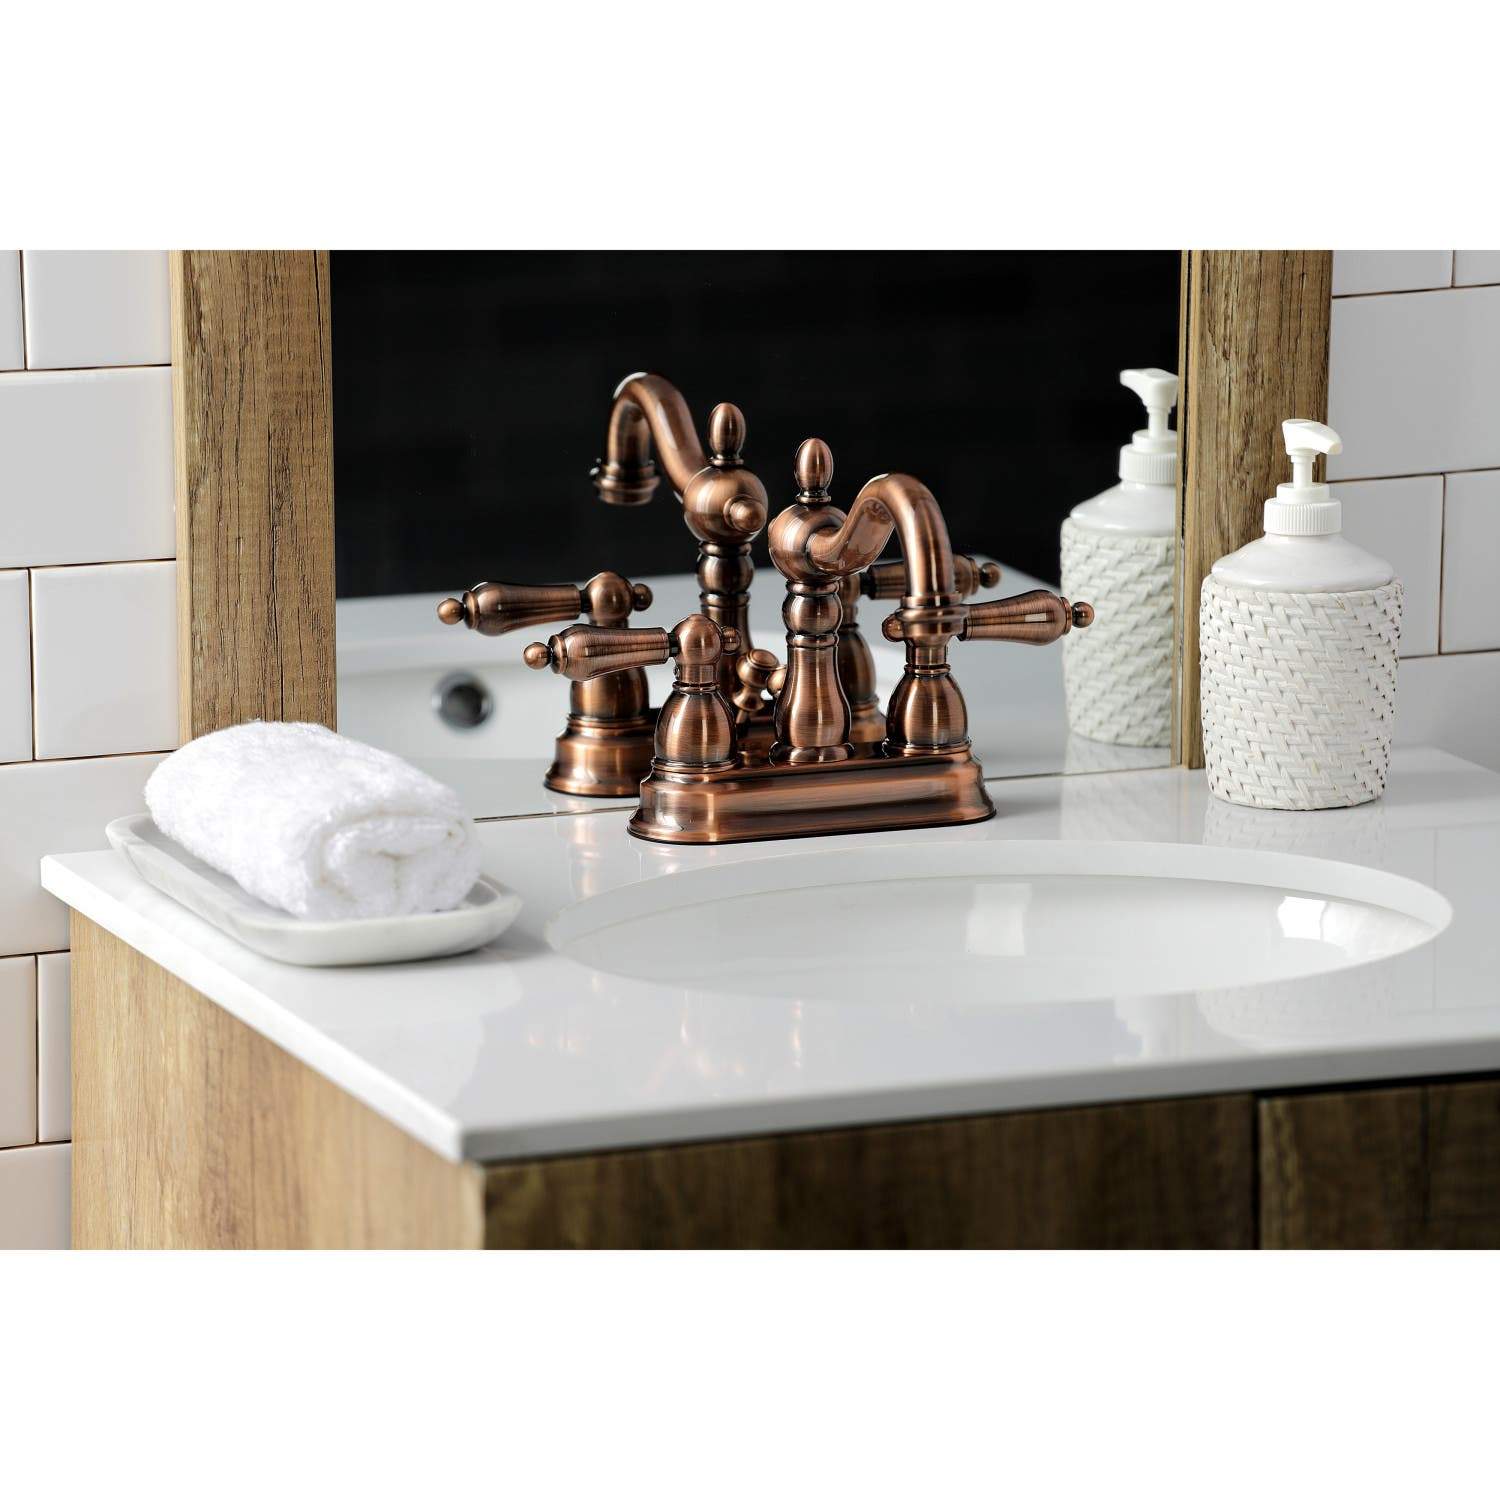 Kingston Brass KB160ALAC Heritage 4 in. Centerset Bathroom Faucet, Antique Copper